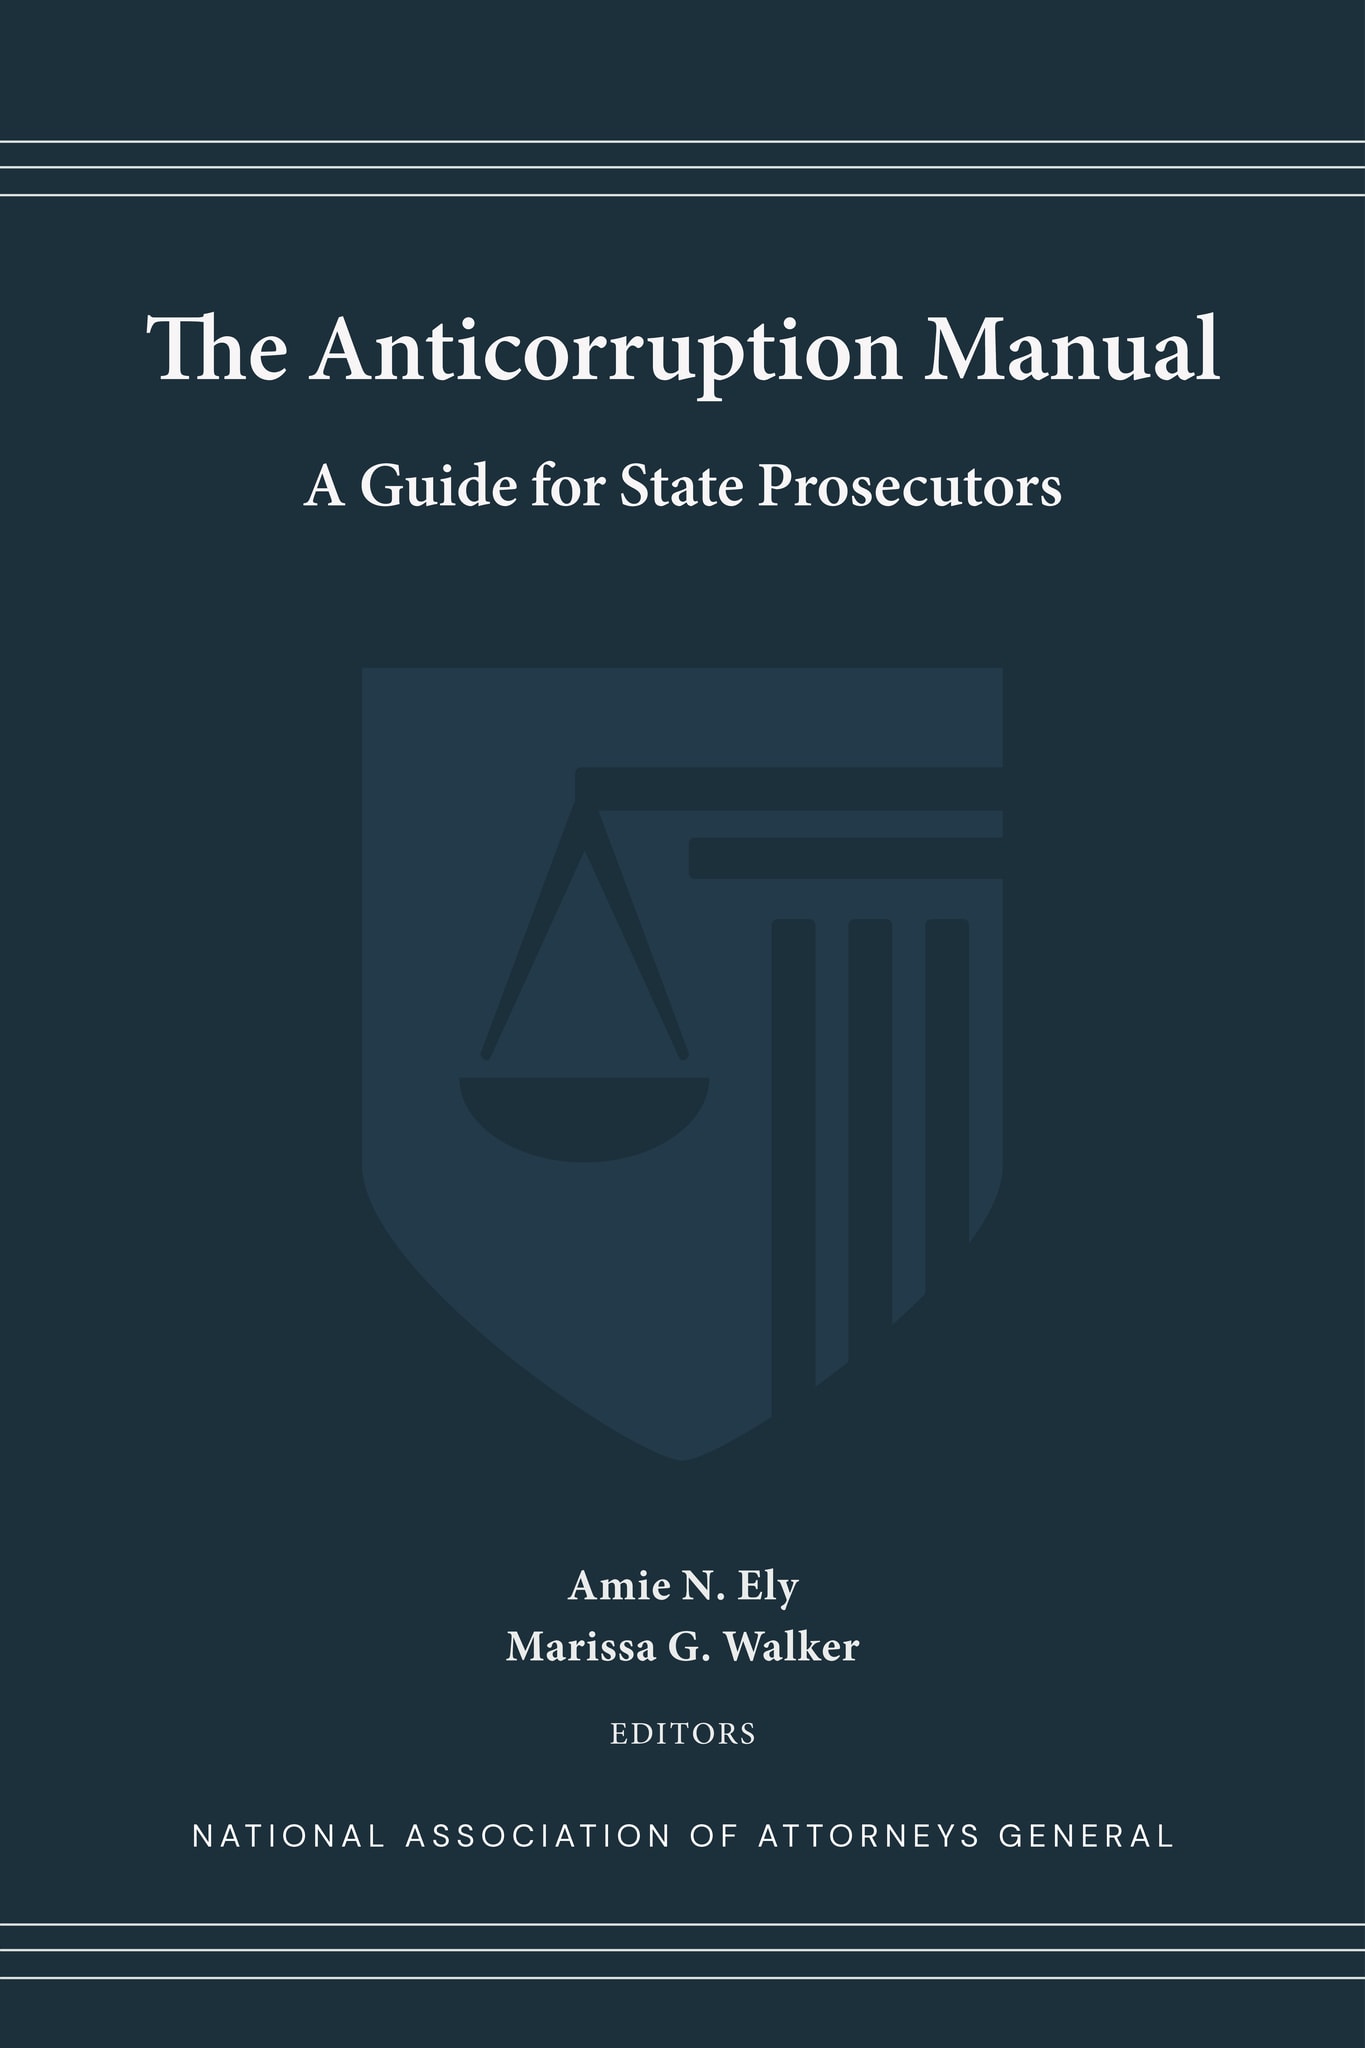 The Anticorruption Manual, A Guide for State Prosecutors, Amie N. Ely, Marissa G. Walker